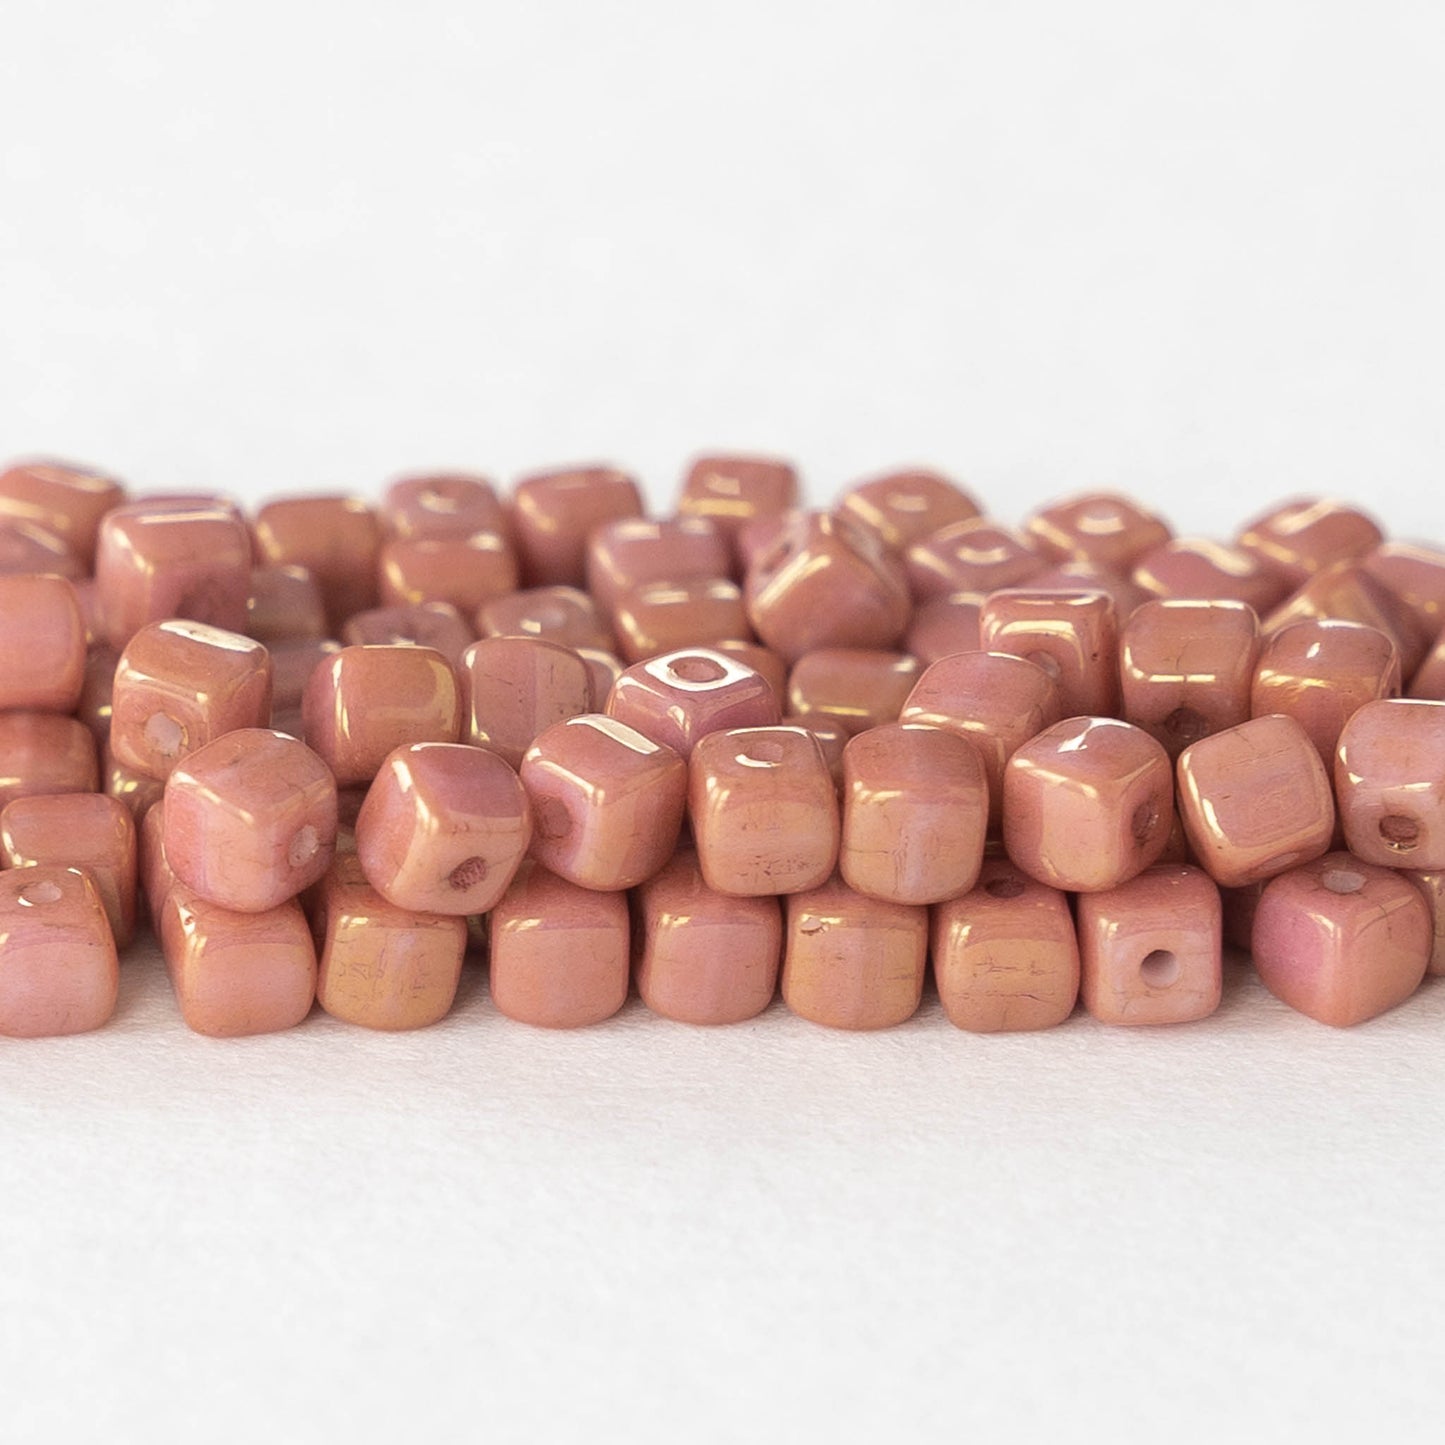 4mm Glass Cube Beads - Opaque Dusty Rose - 100 beads